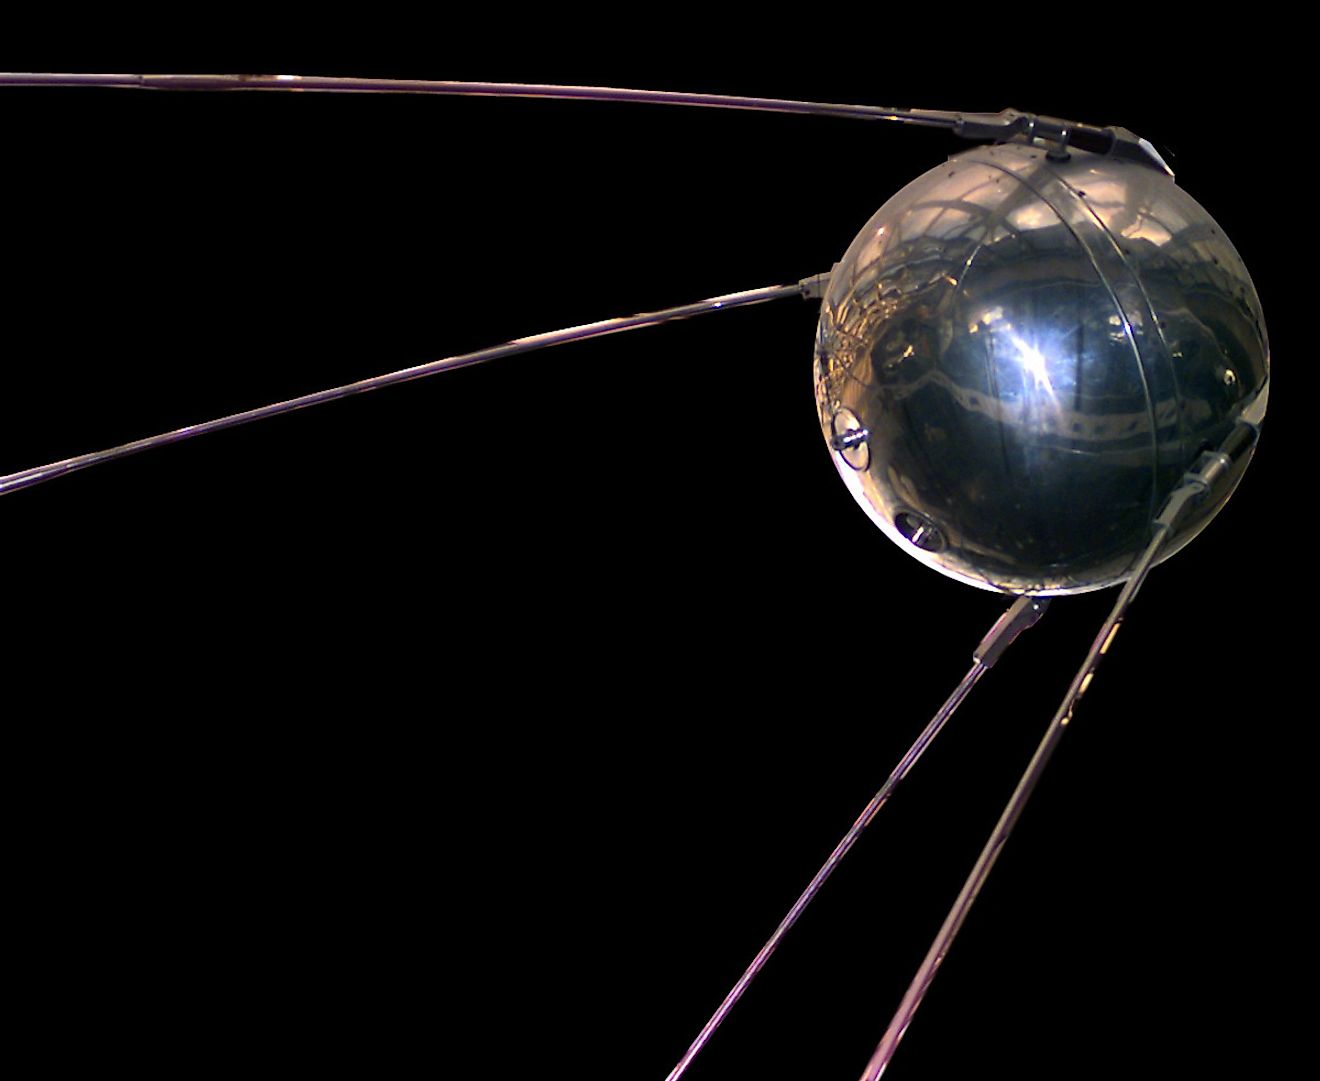 A replica of Sputnik 1, the first artificial satellite in the world to be put into outer space.